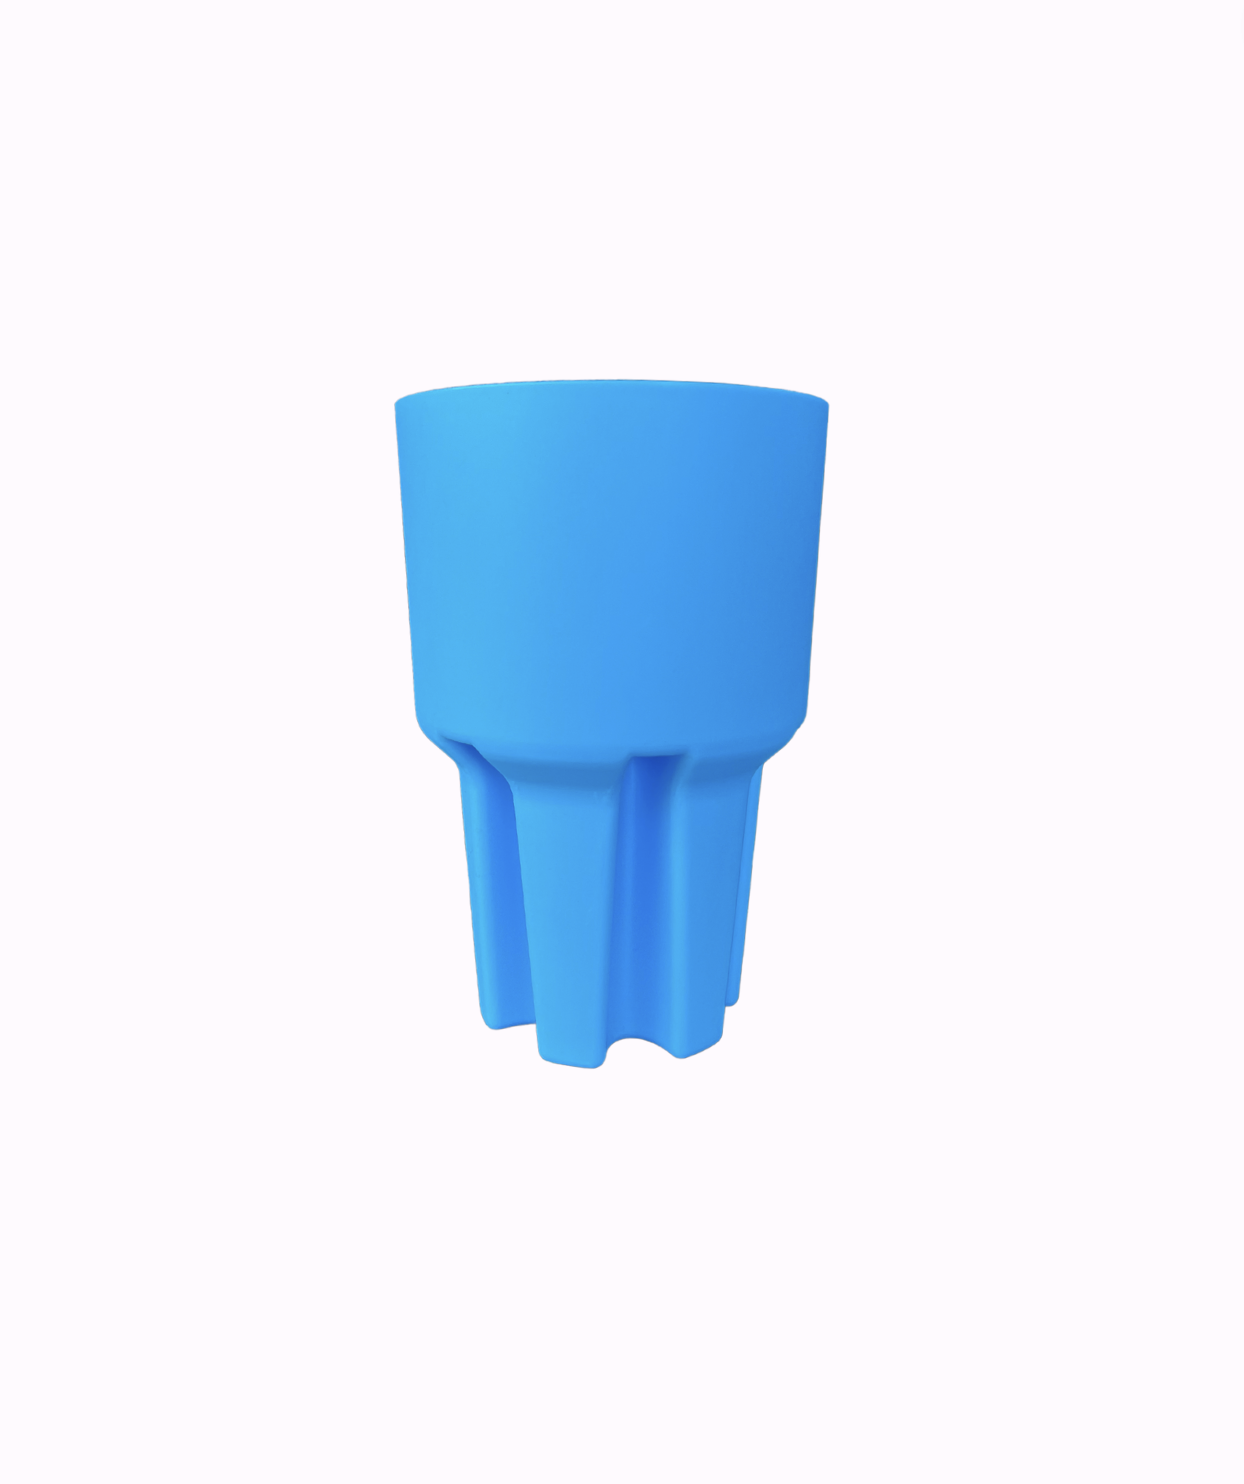 Car Cup Holder Expander by Willy & Bear